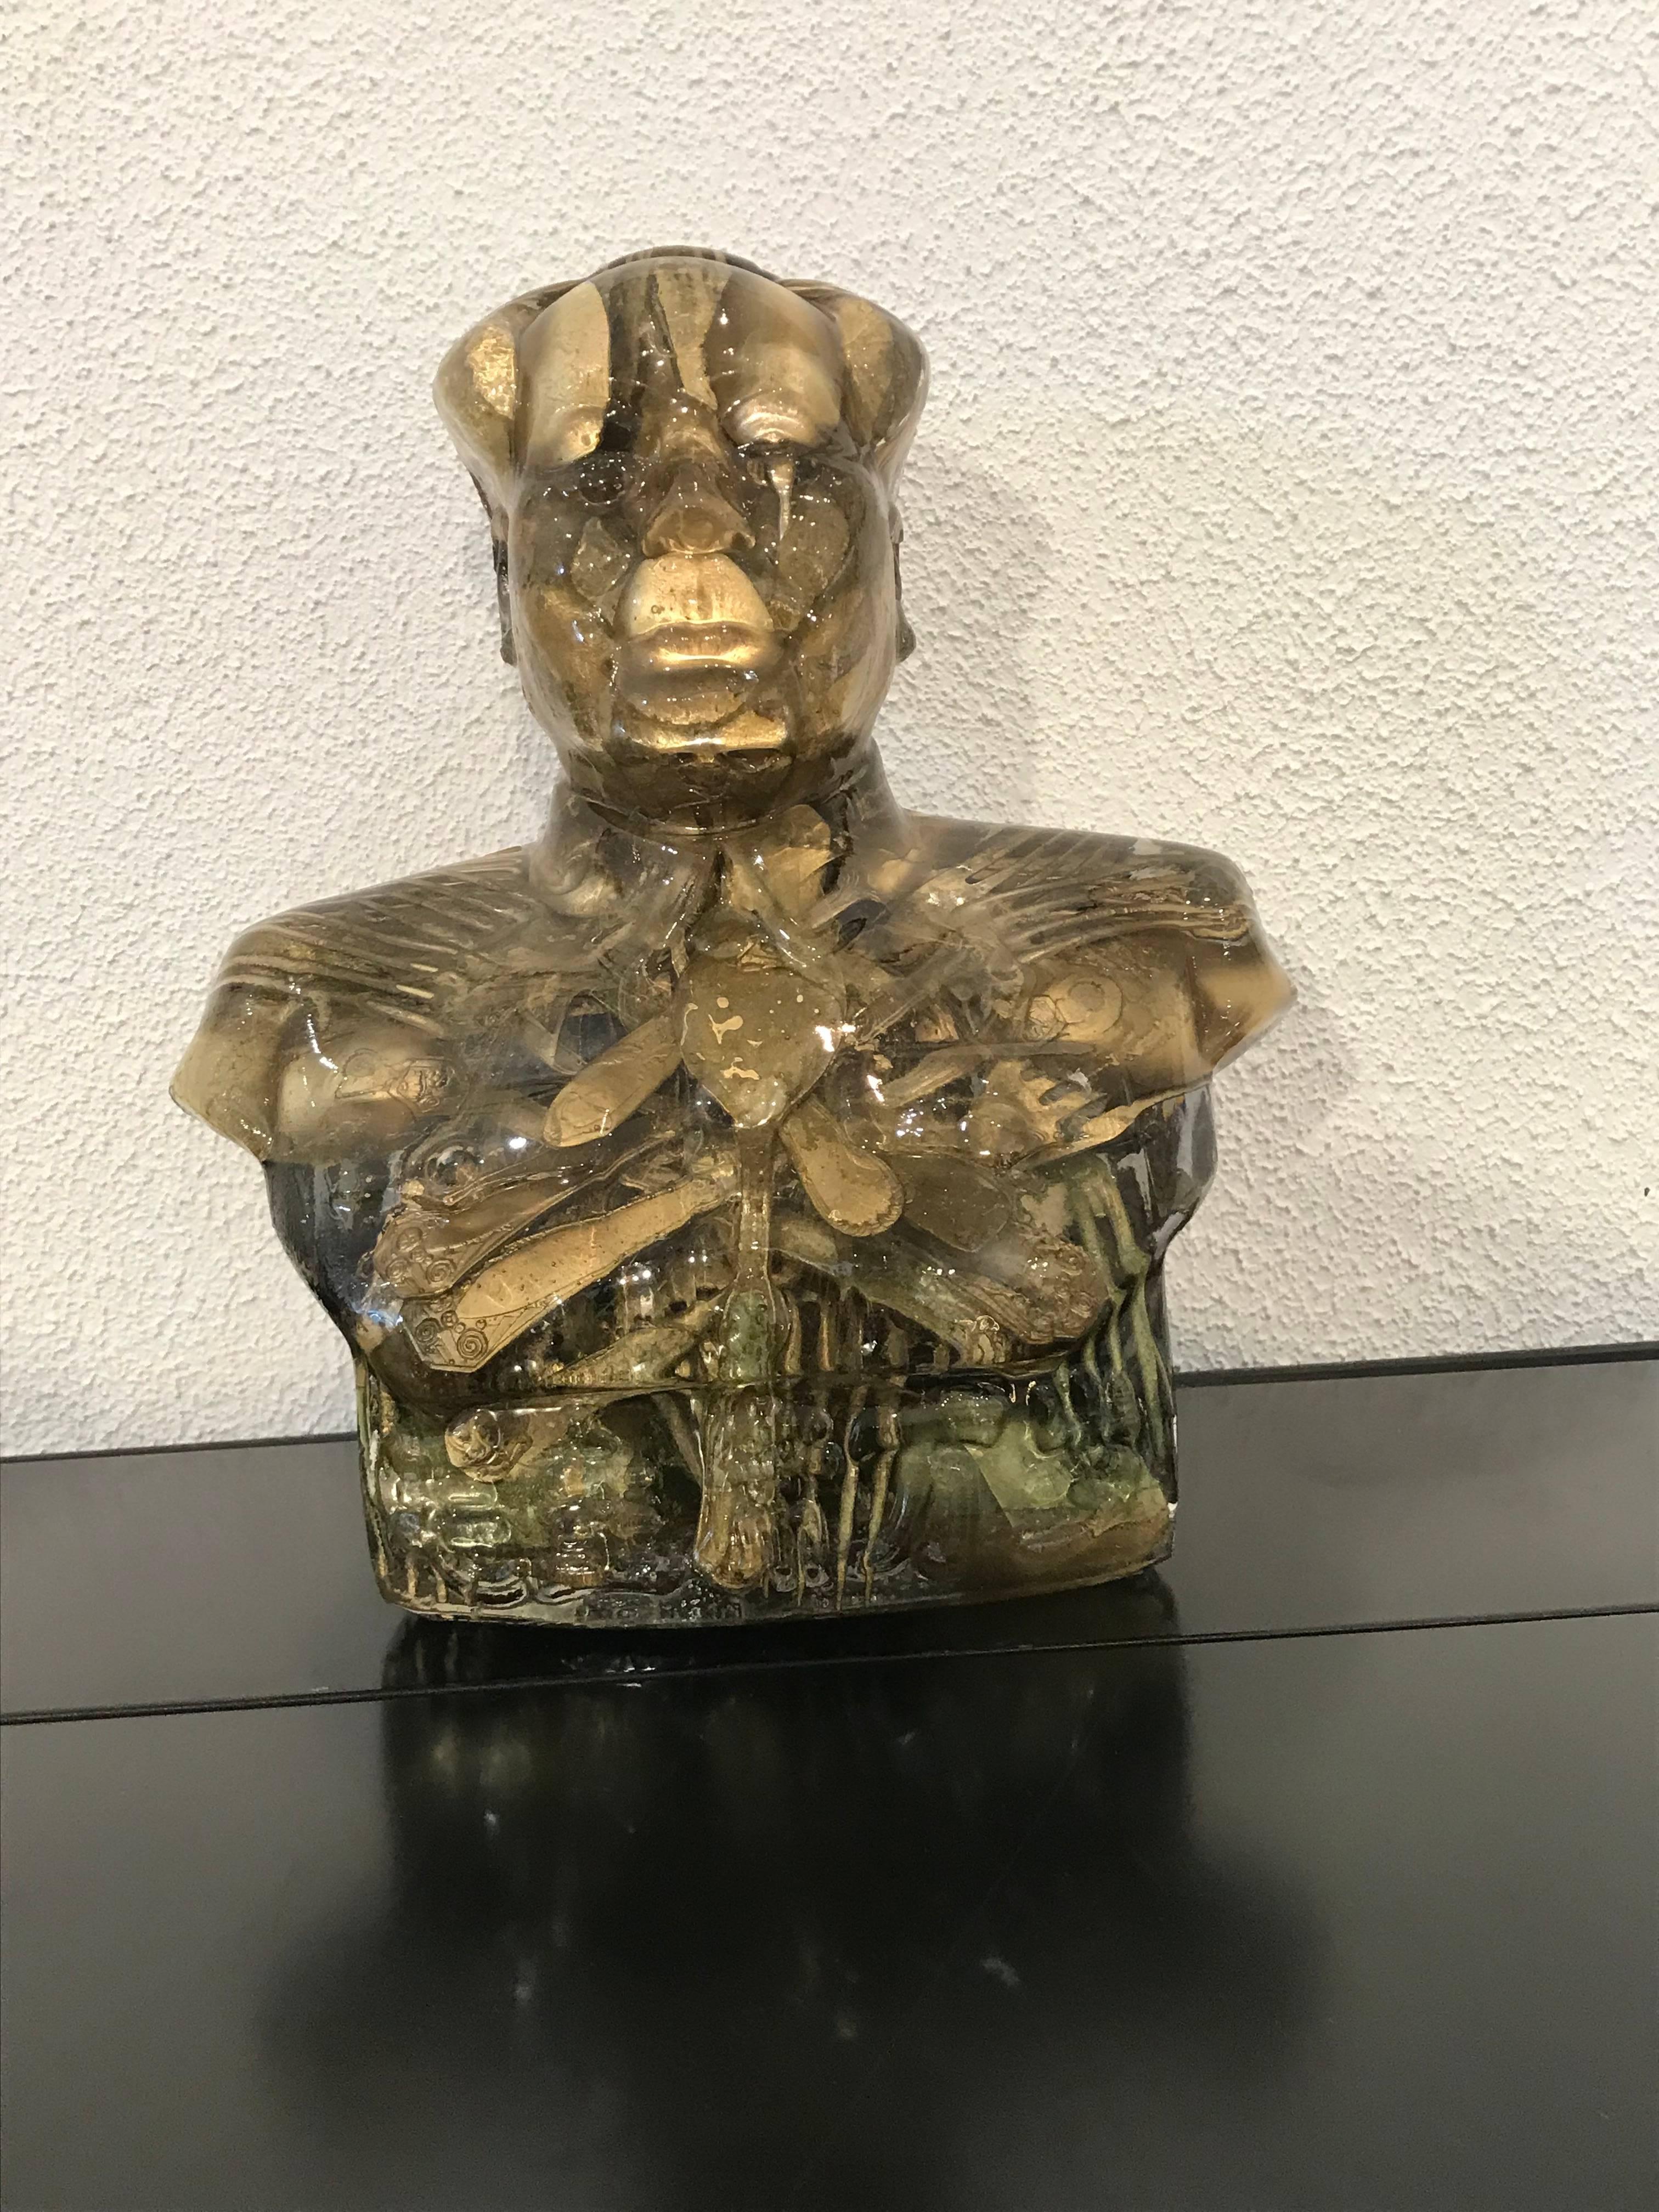 Exceptional bust of Mao by Alben.
Inclusion of antique cutlery.
Work signed underneath.
Material: Resin and metal cutlery.